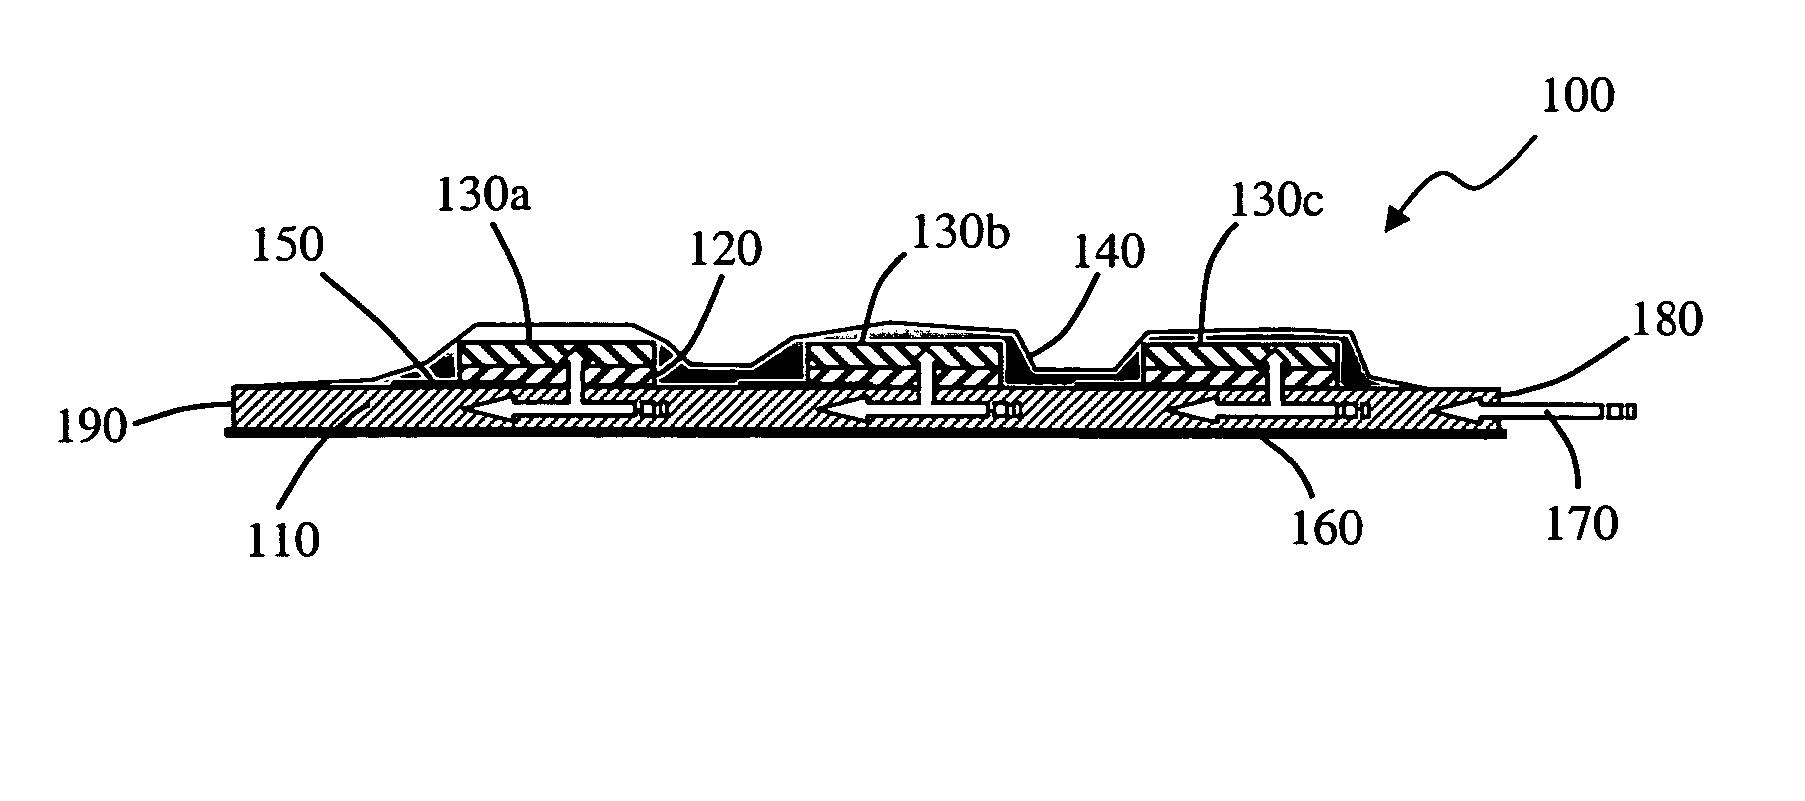 Lateral flow assay devices and methods of use